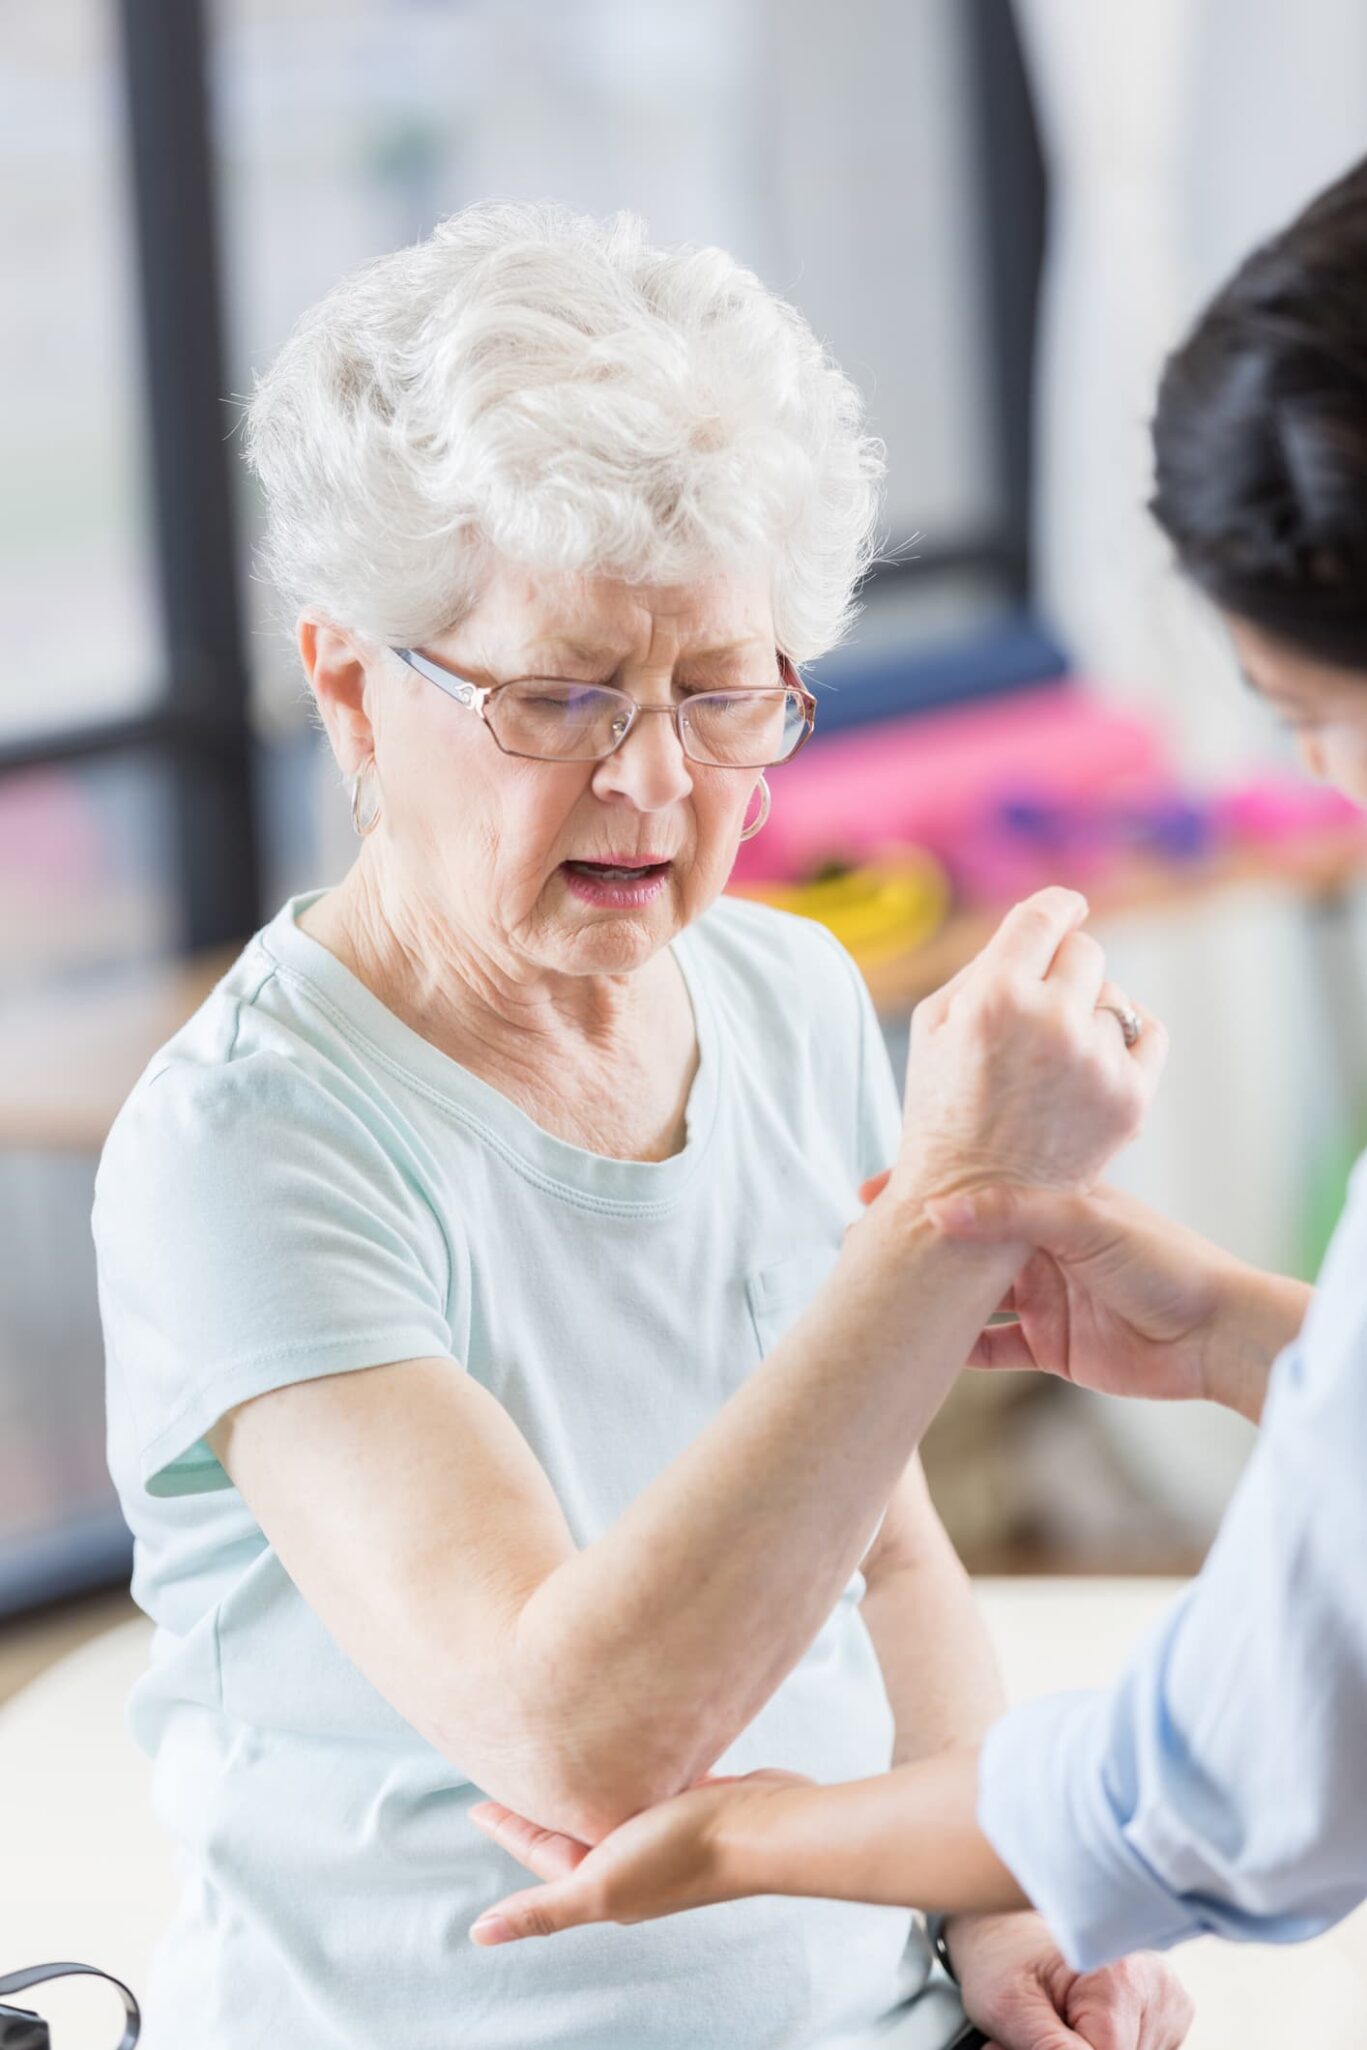 Older woman working on arm range of motion with therapist.